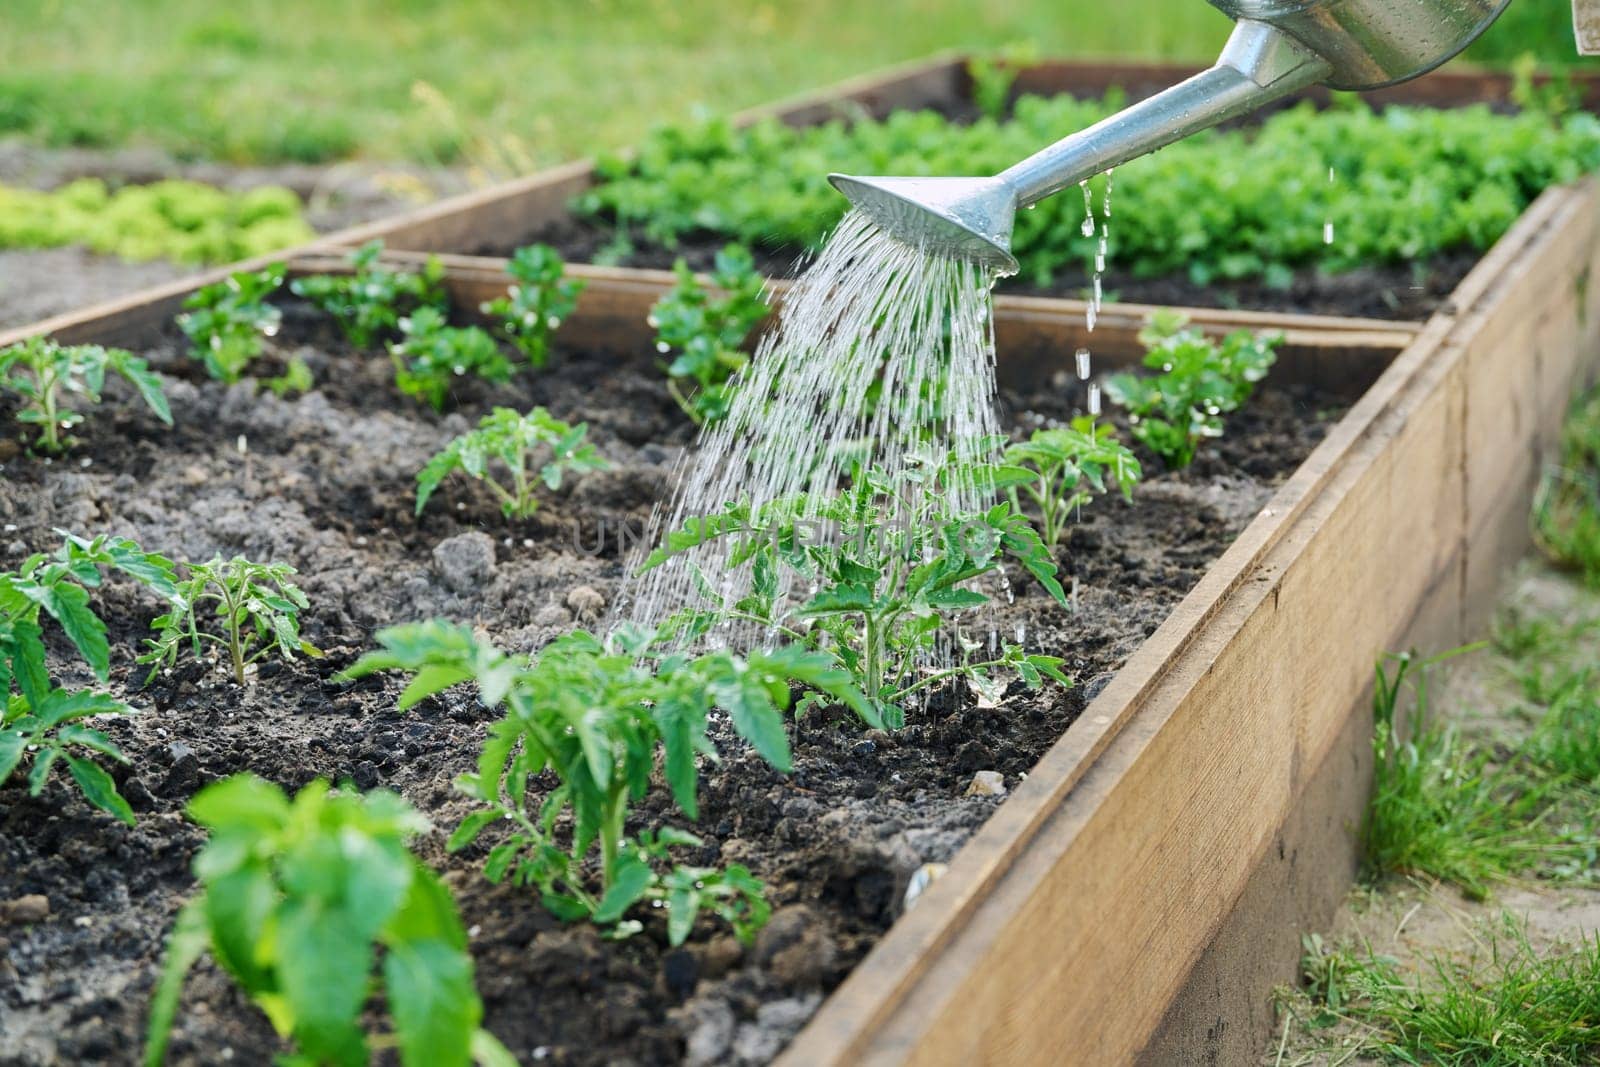 Close-up of watering can watering young tomato and vegetable plants in wooden bed. Agriculture, work in the spring summer vegetable garden